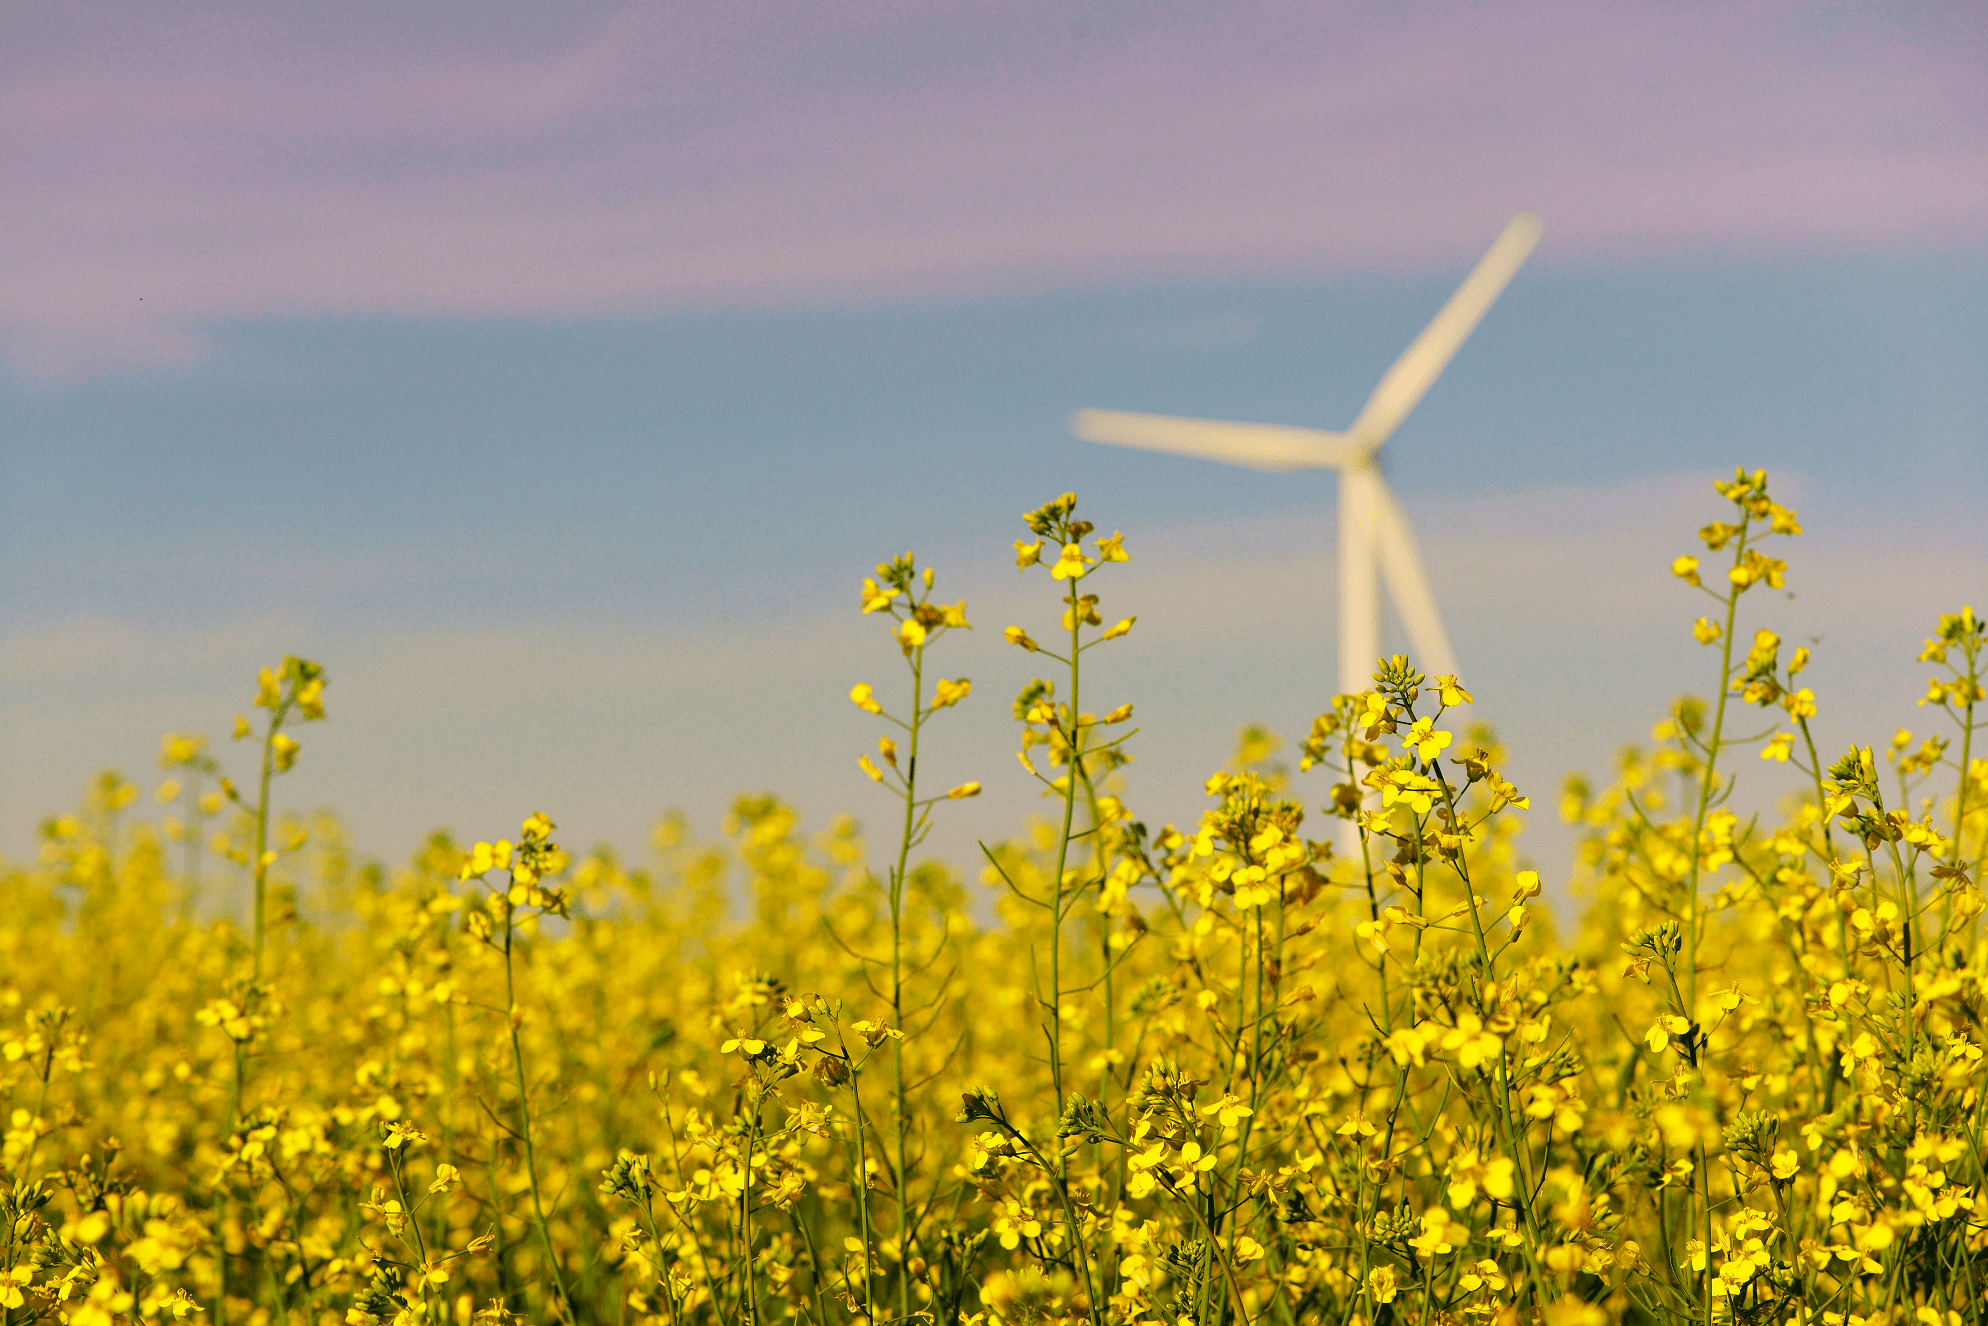 An image showing a windmill against a pink sunrise. In the foreground, there are bright yellow canola flowers.